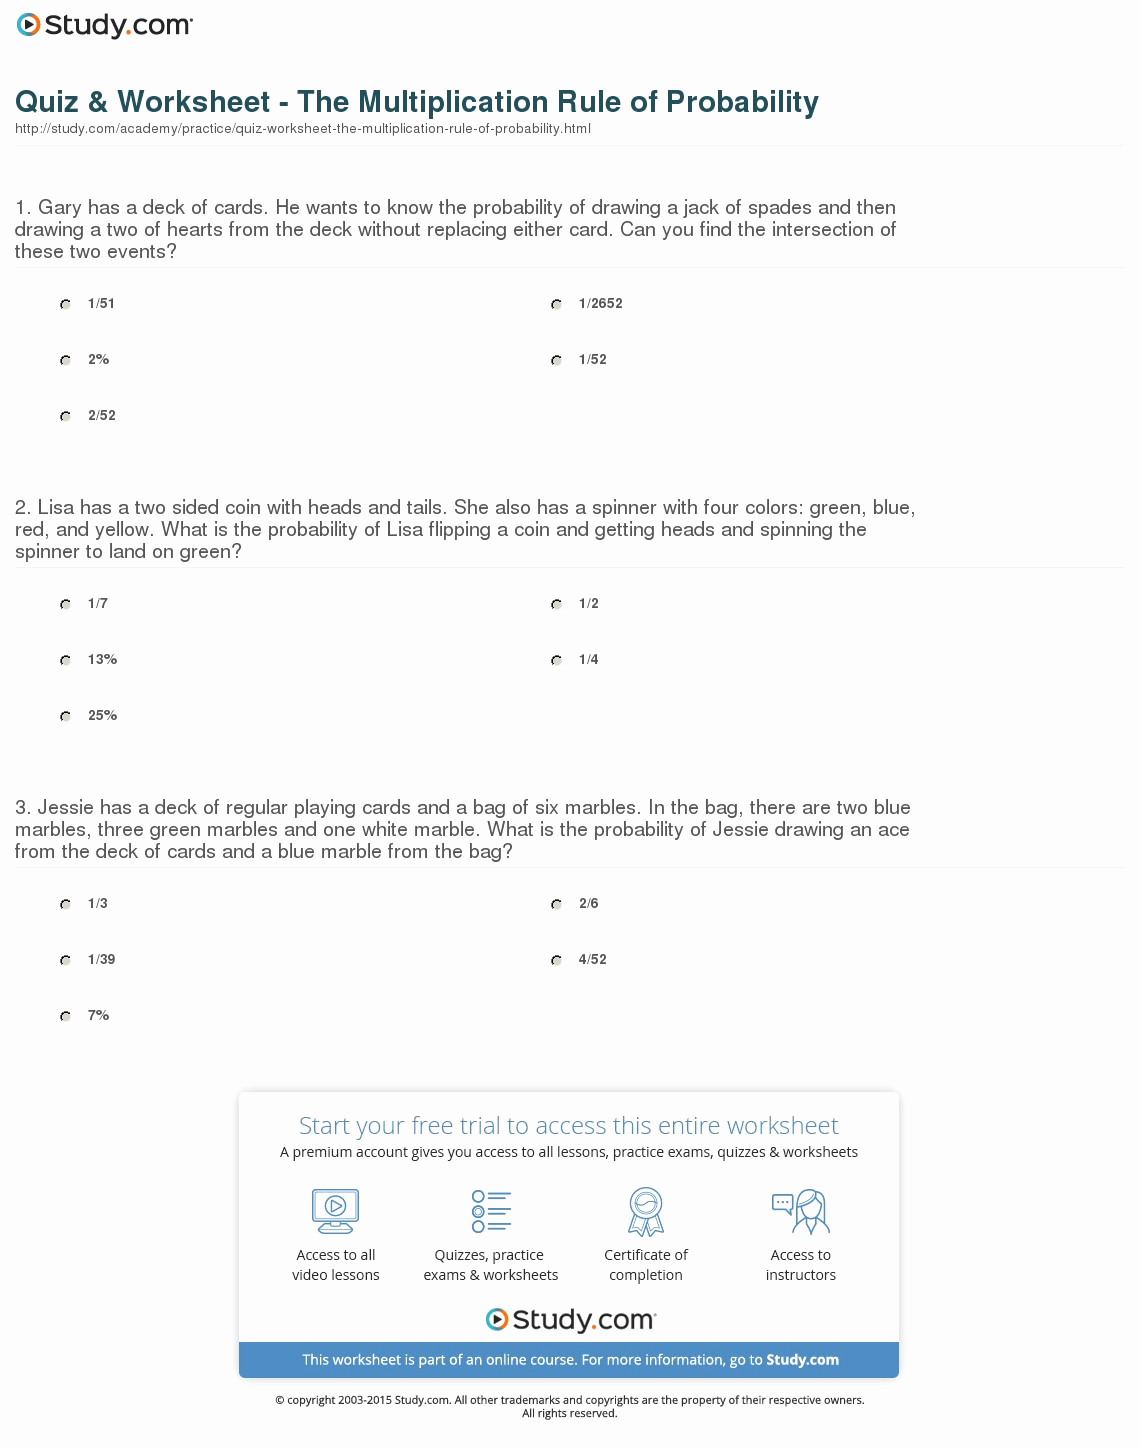 Dependent Probability Worksheets Awesome Independent and Dependent Probability Worksheet with